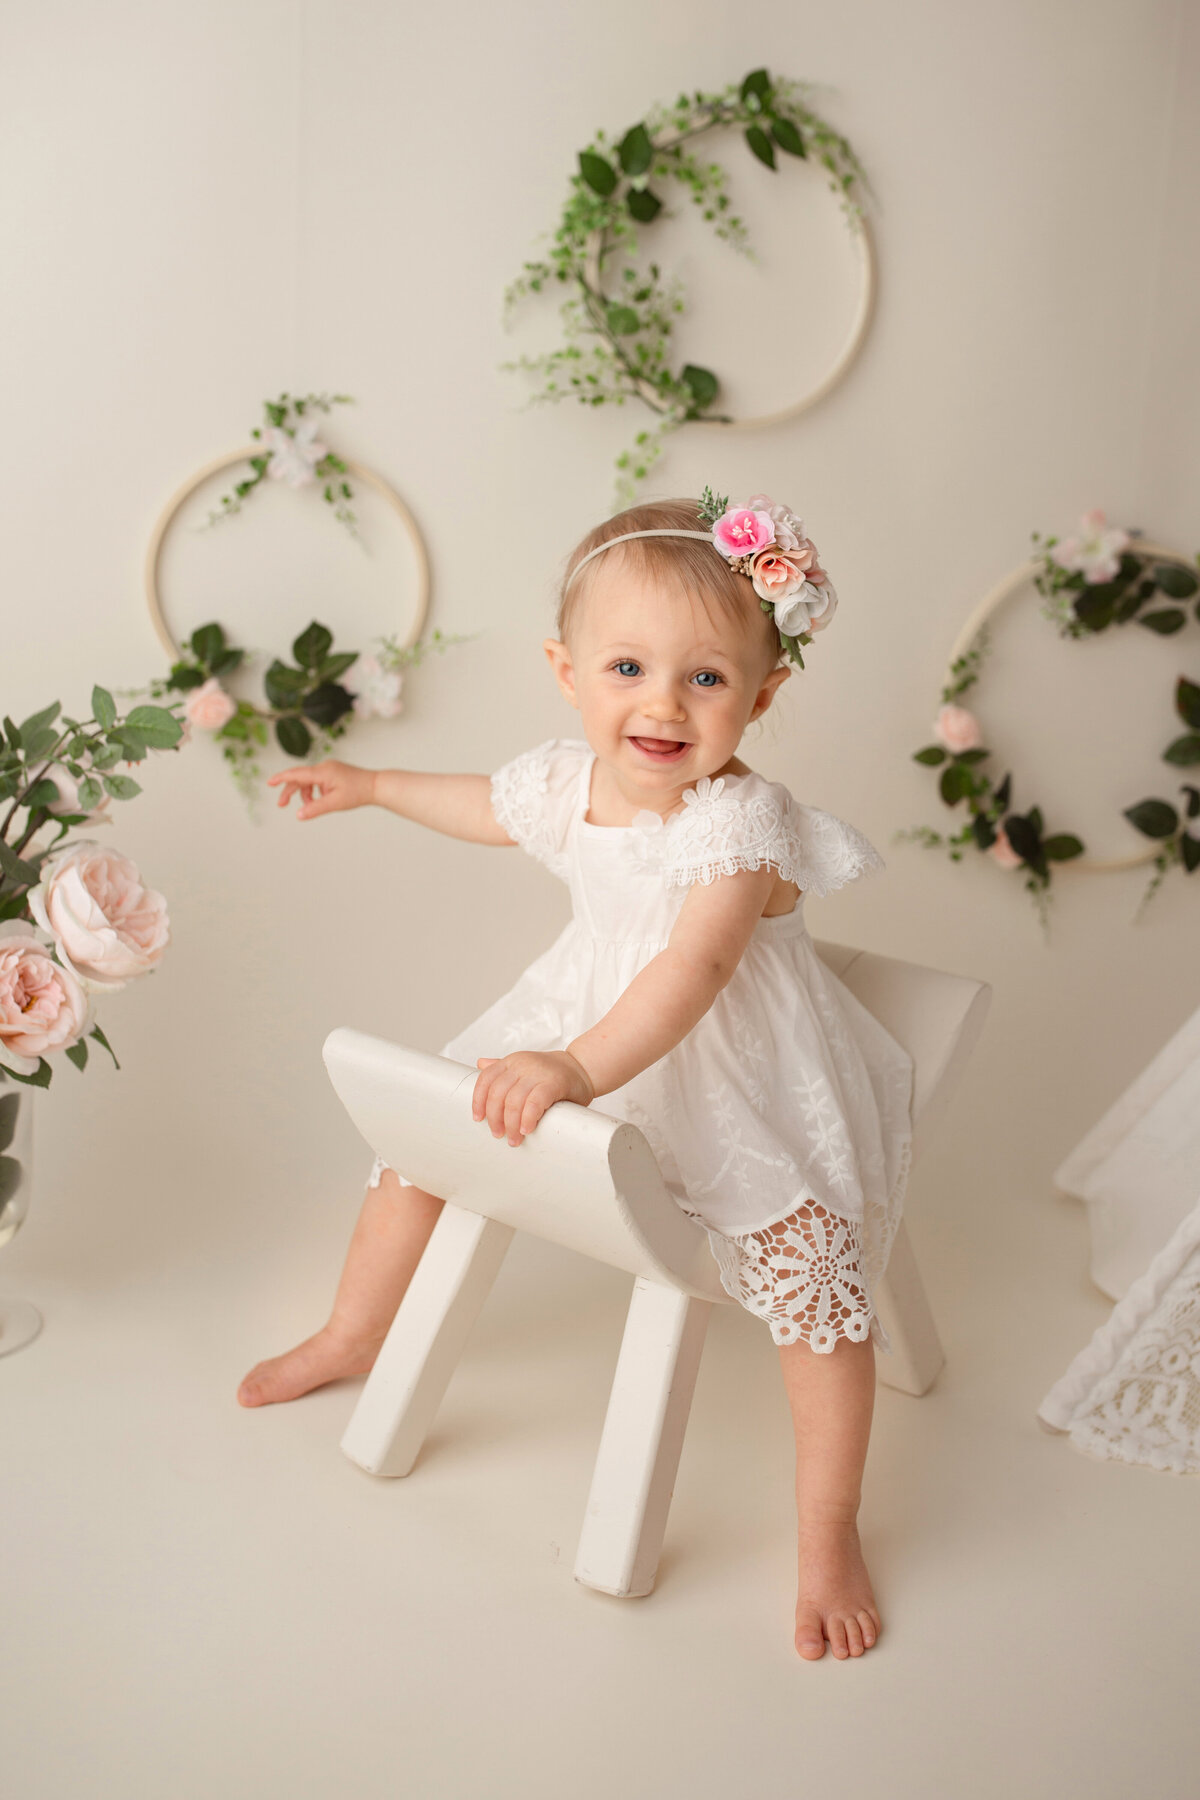 1 year old girl posing for her birthday portraits